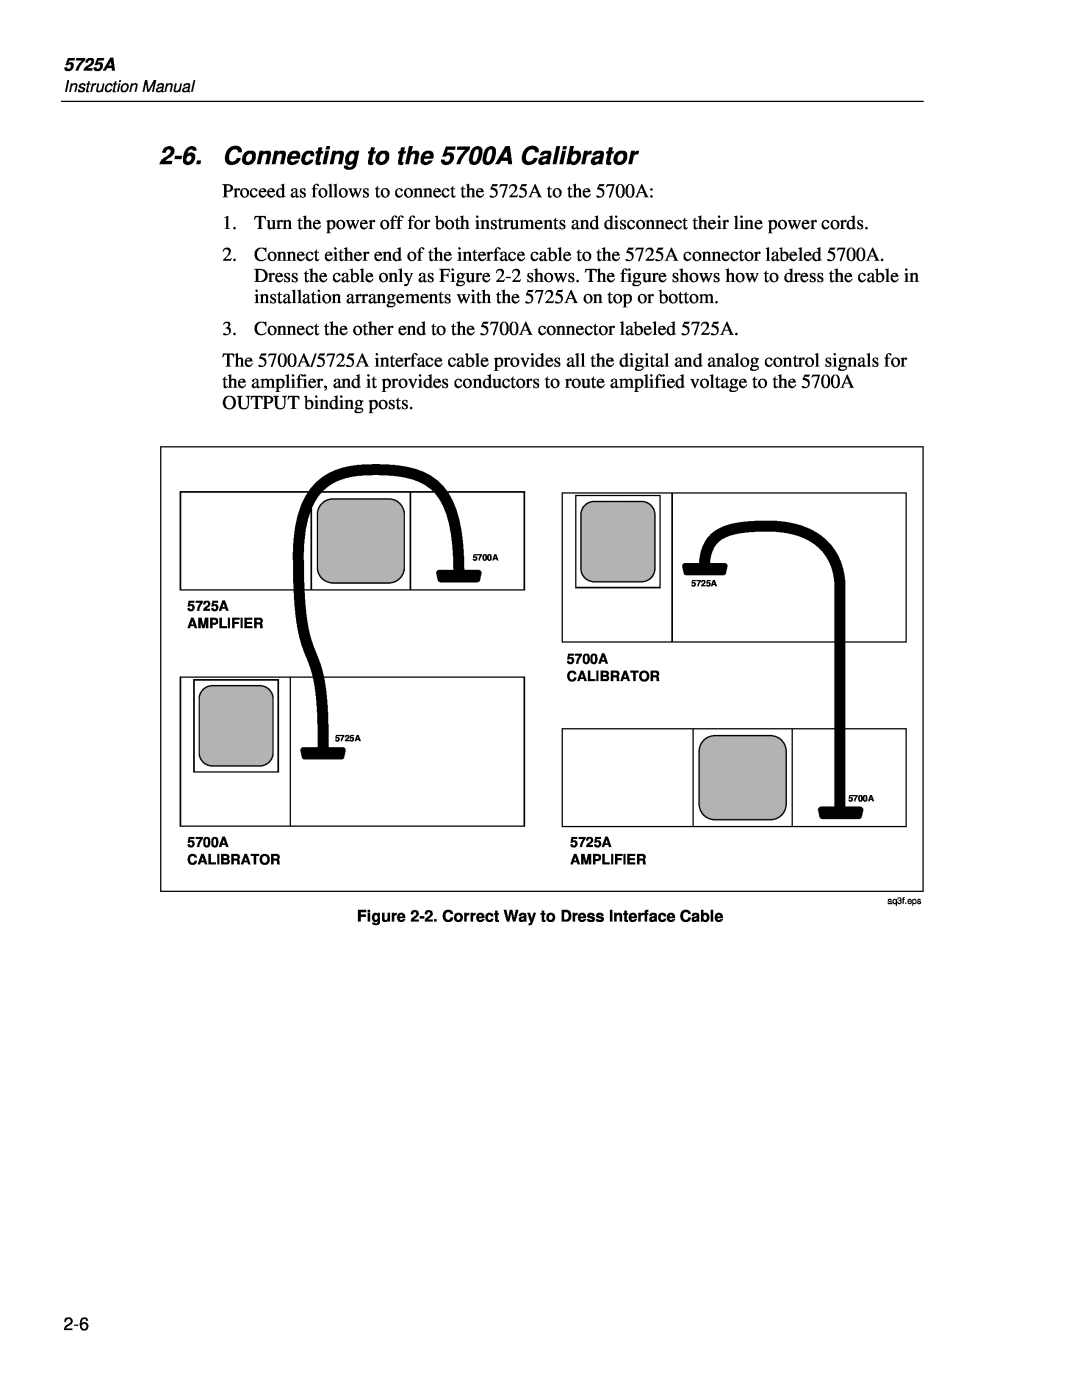 Fluke 5725A instruction manual Connecting to the 5700A Calibrator, 2.Correct Way to Dress Interface Cable 